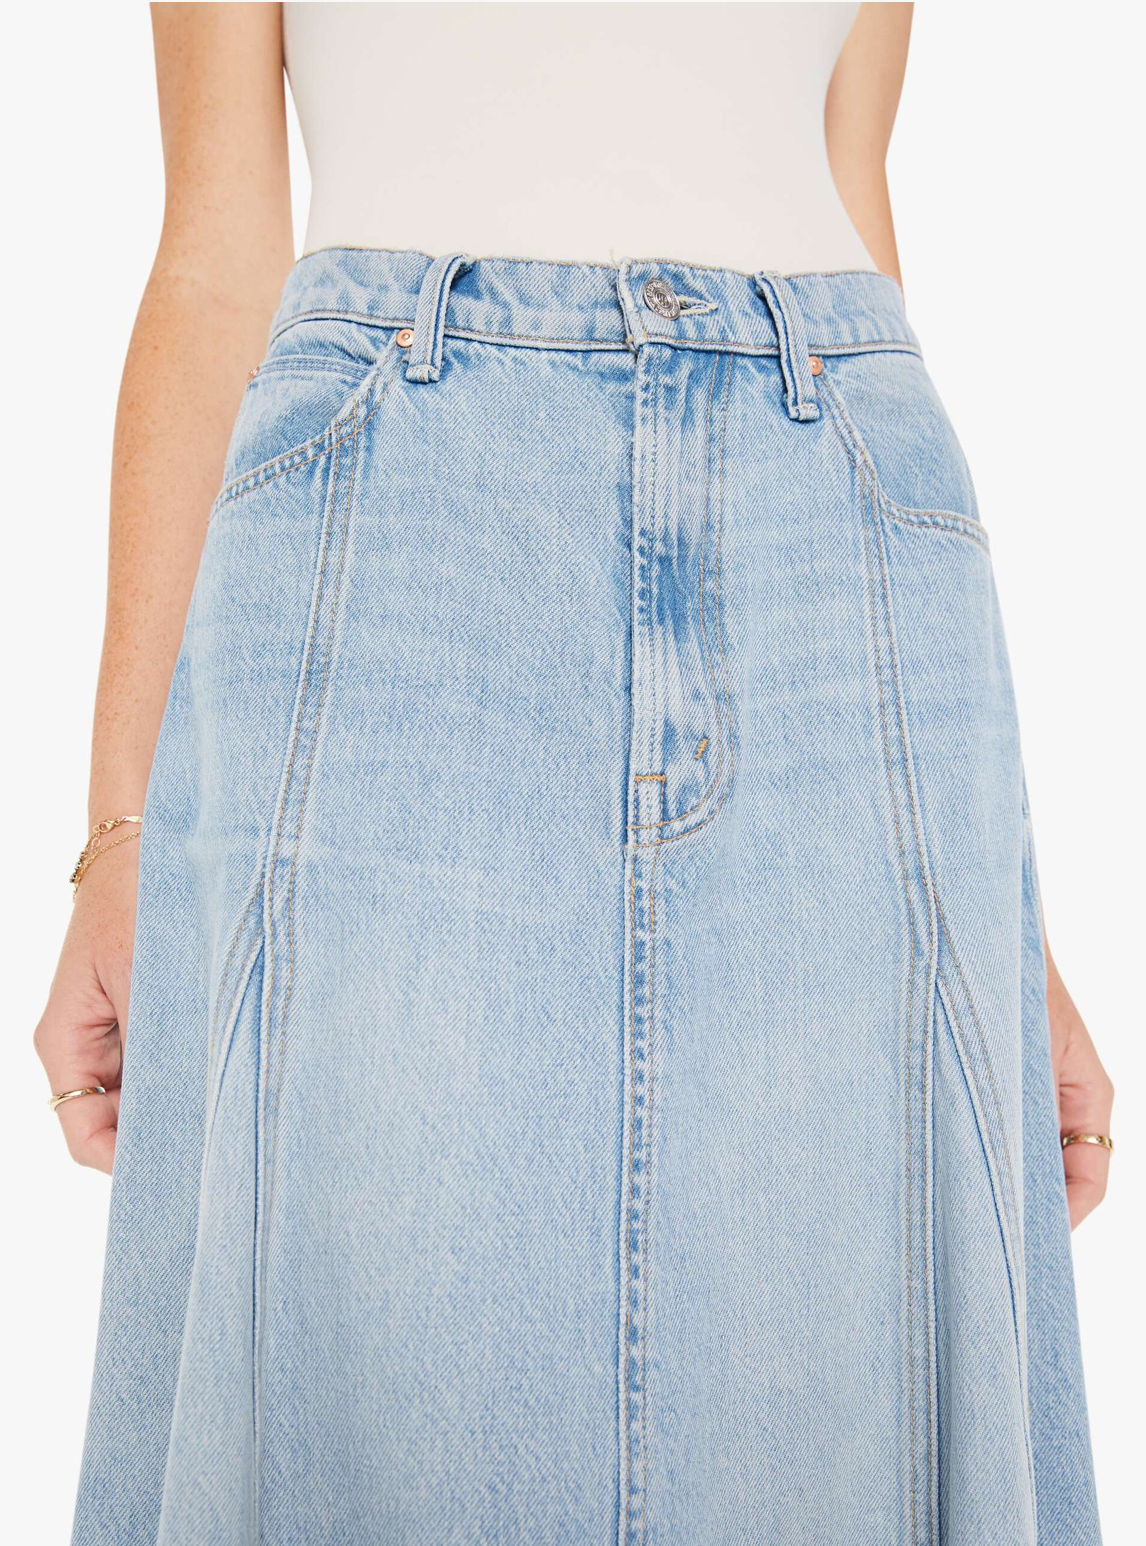 Close-up view of a woman wearing The Full Swing I'm With The Band denim skirt, showing details from waist to mid-thigh, with a focus on the skirt's stitching and Arizona-style fabric texture.